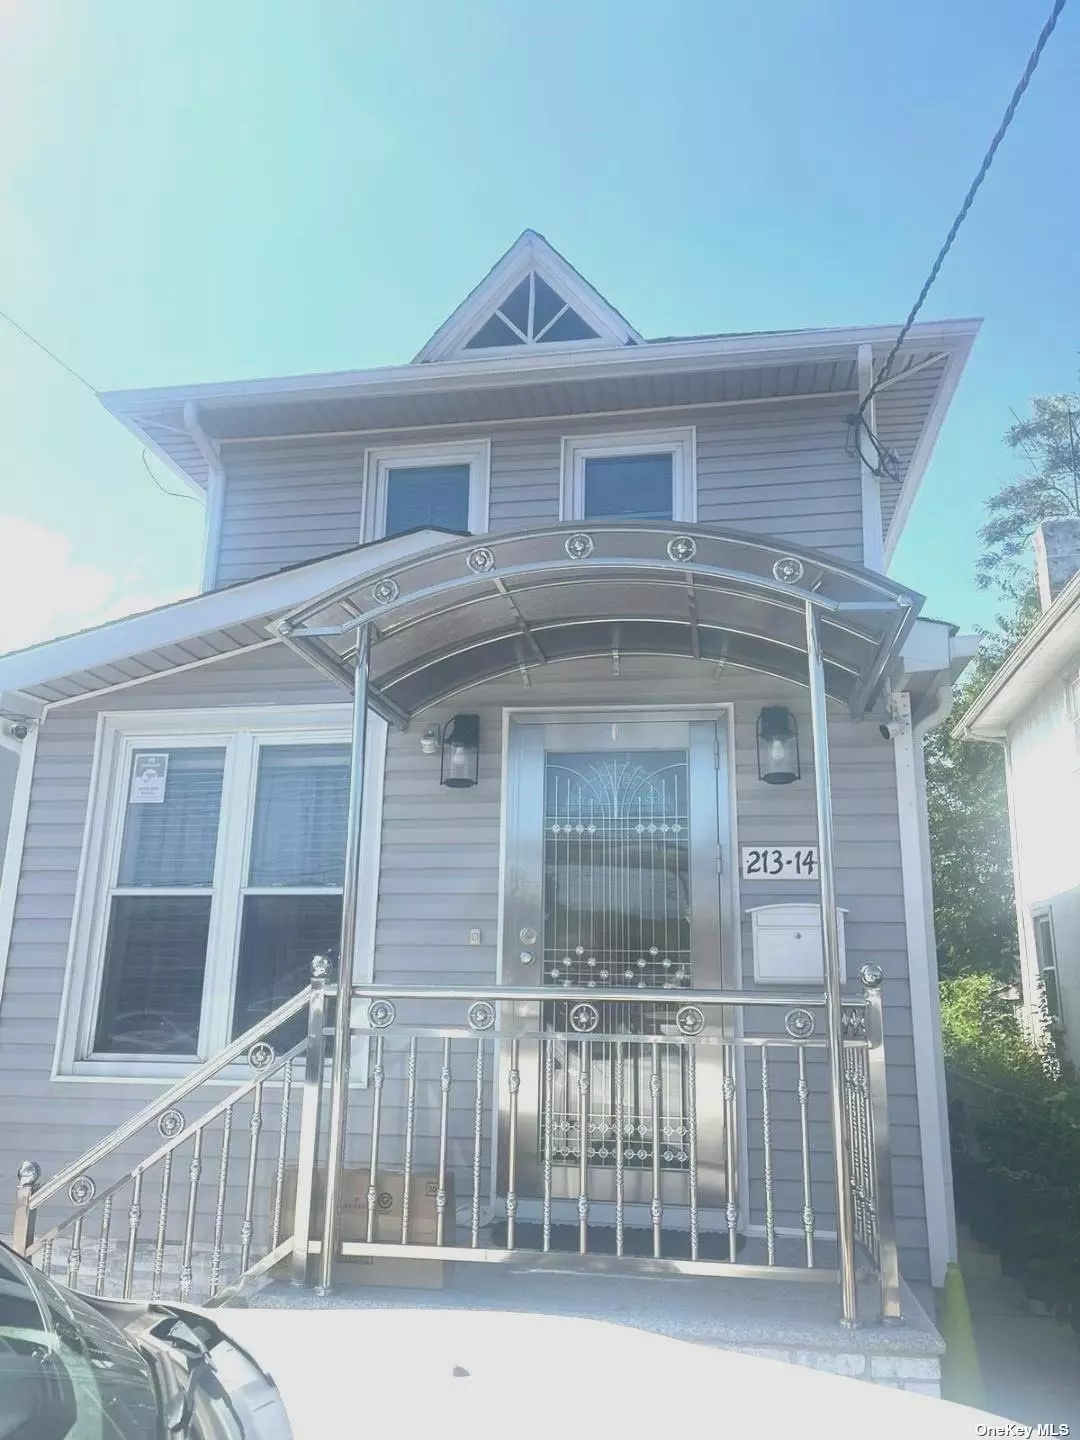 Welcome home to this fully updated 2 story home!! new windows, flooring, bathrooms, fully finished basement , all new floors , kitchen, roof, siding, huge one car garage, private driveway, solar panel etc come check it out this surely won&rsquo;t last,